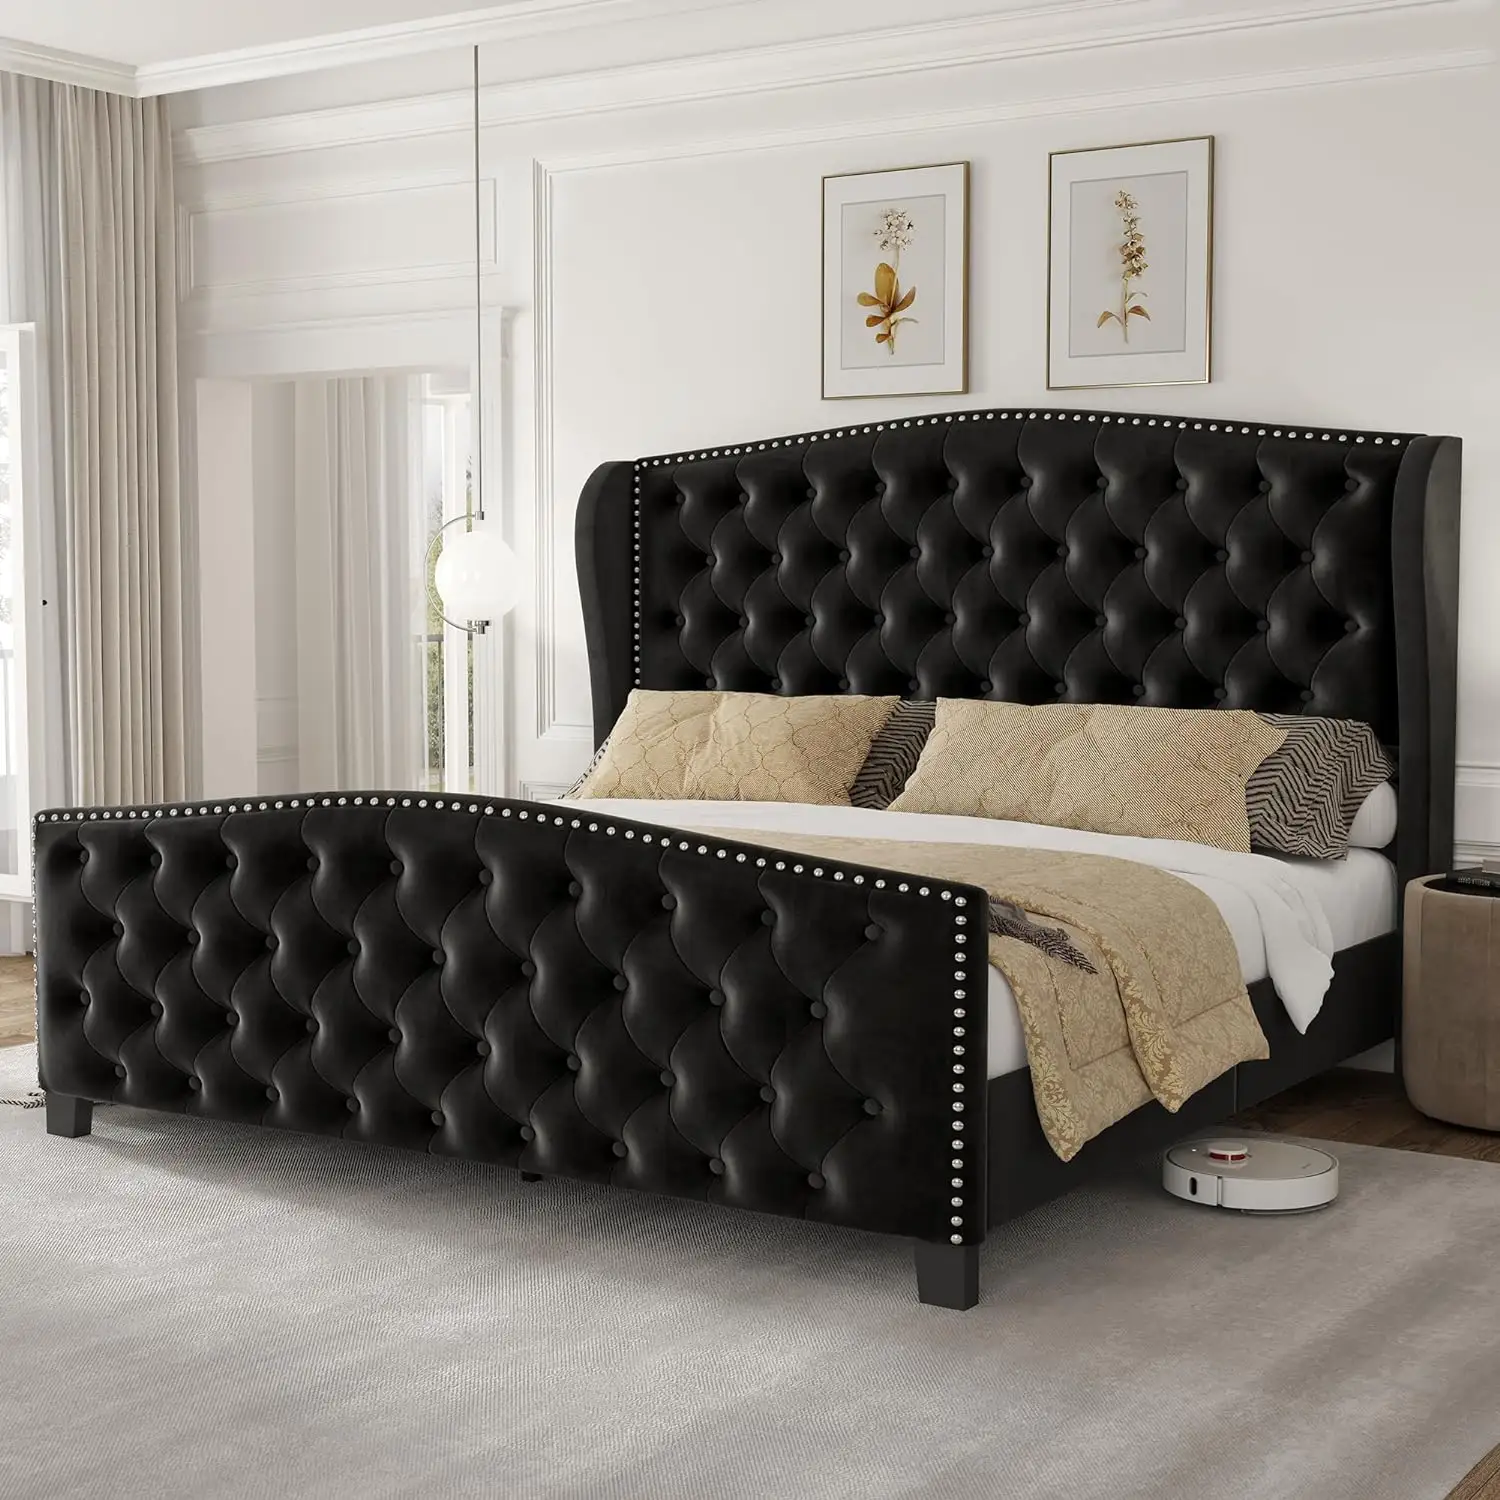 Modern Wooden Bed Frame High Headboard Tufted Buttons Full Size High Quality Furniture for Bedroom from Vietnam factory